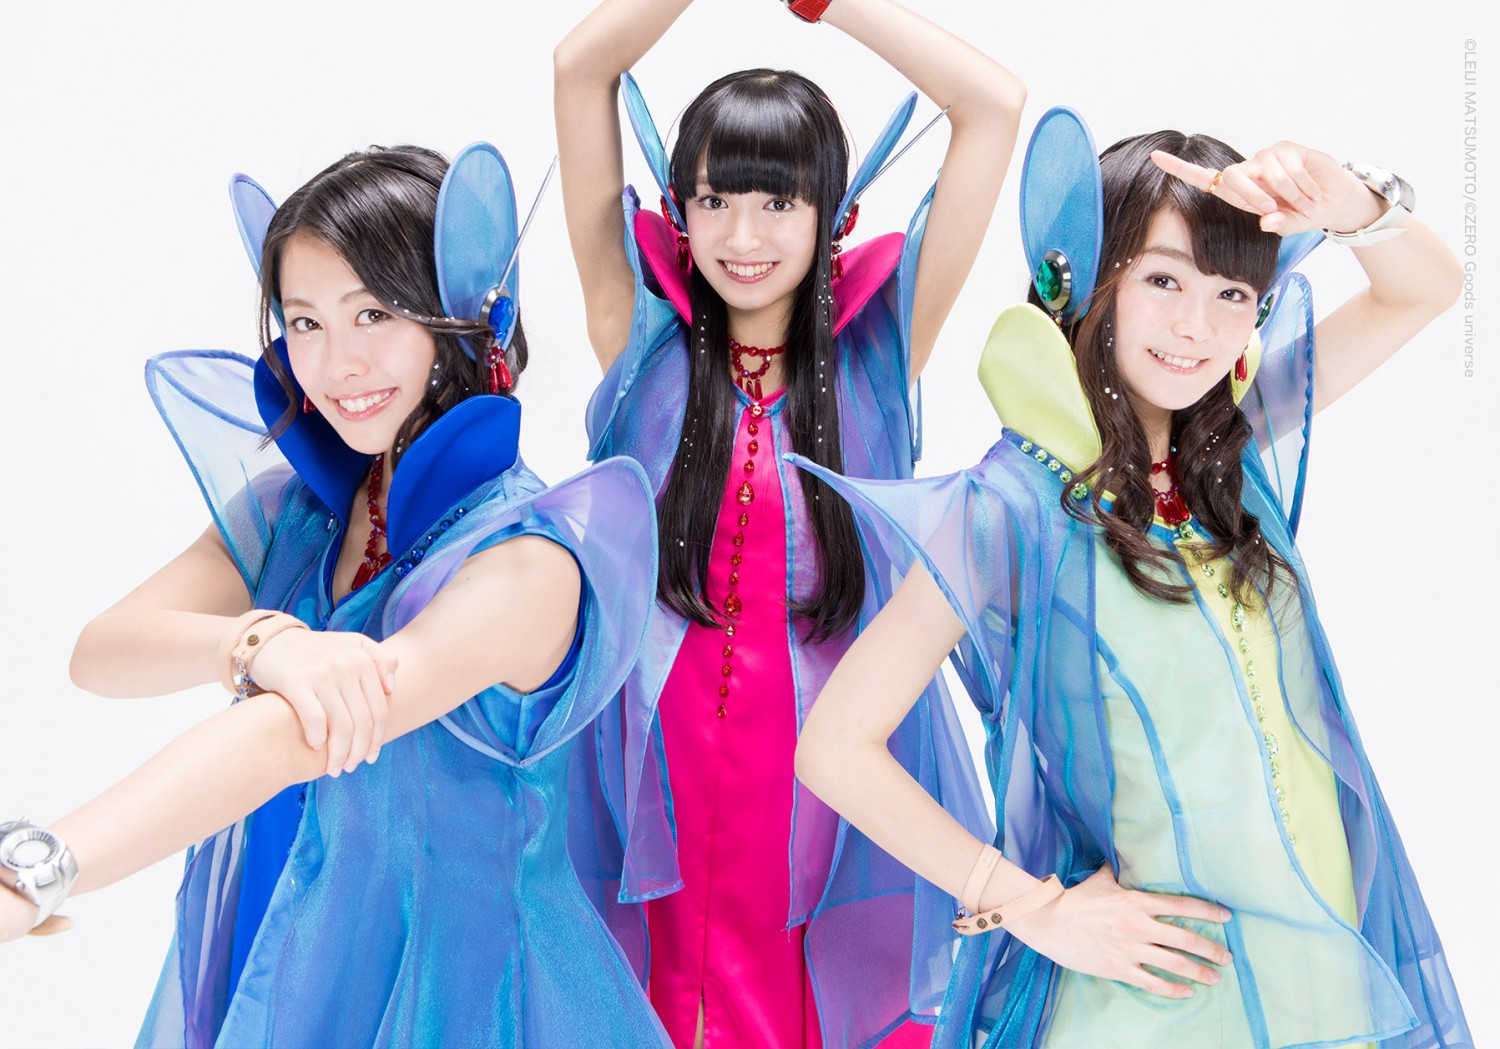 Cupitron Set off on a Never Ending Journey in the MV for “Ginga Tetsudo 999”!